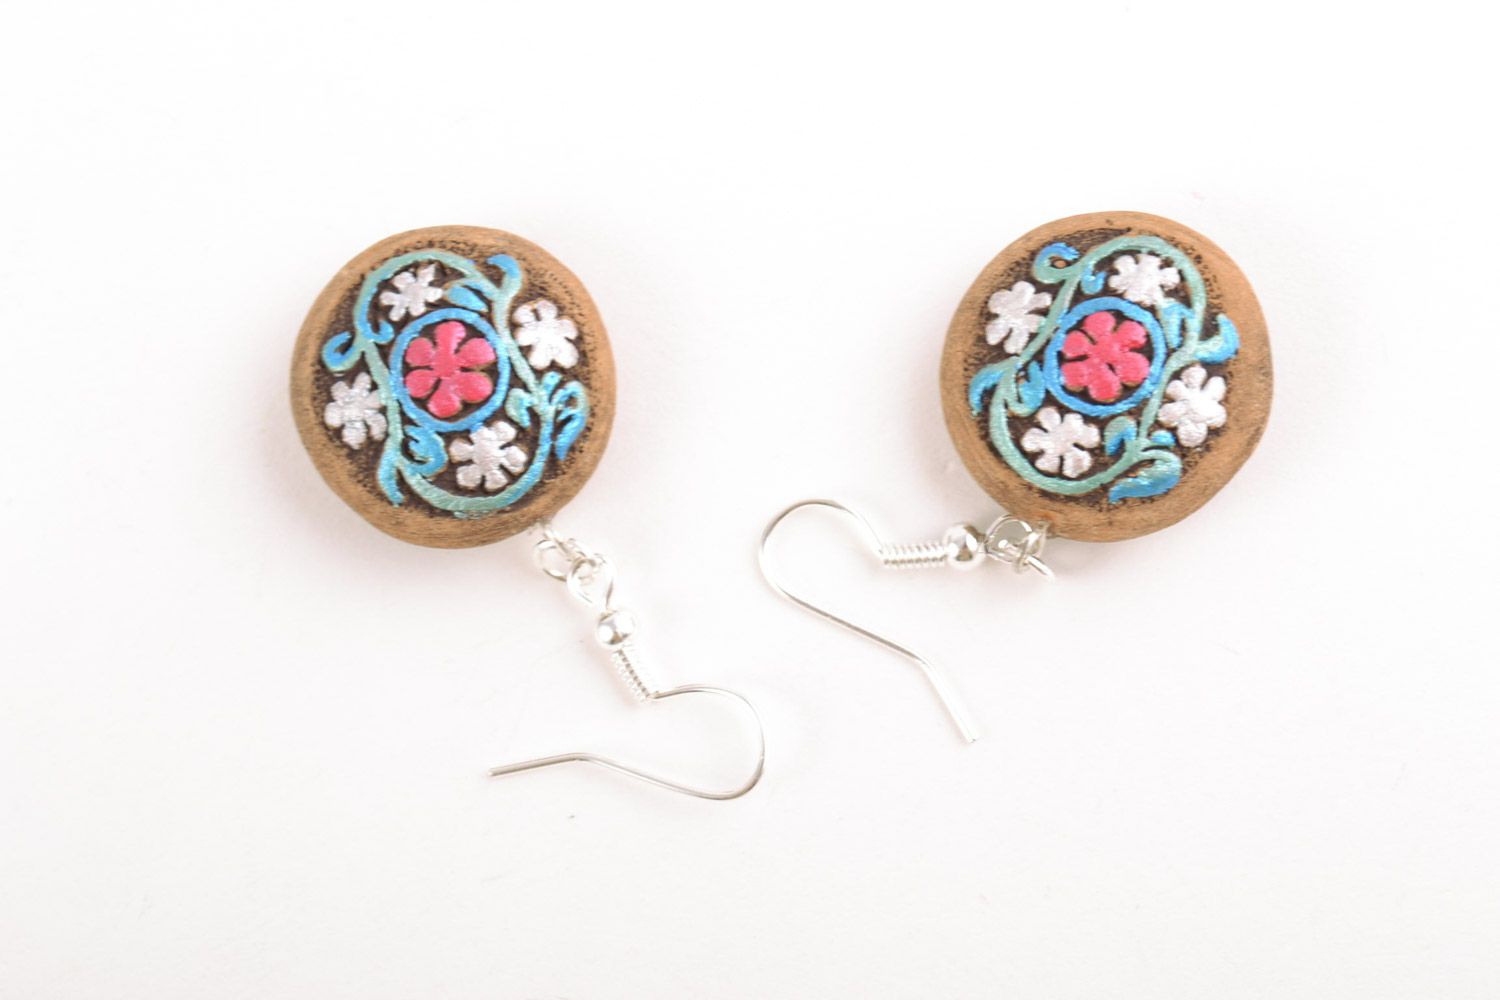 Small handmade clay round earrings painted with acrylics photo 5